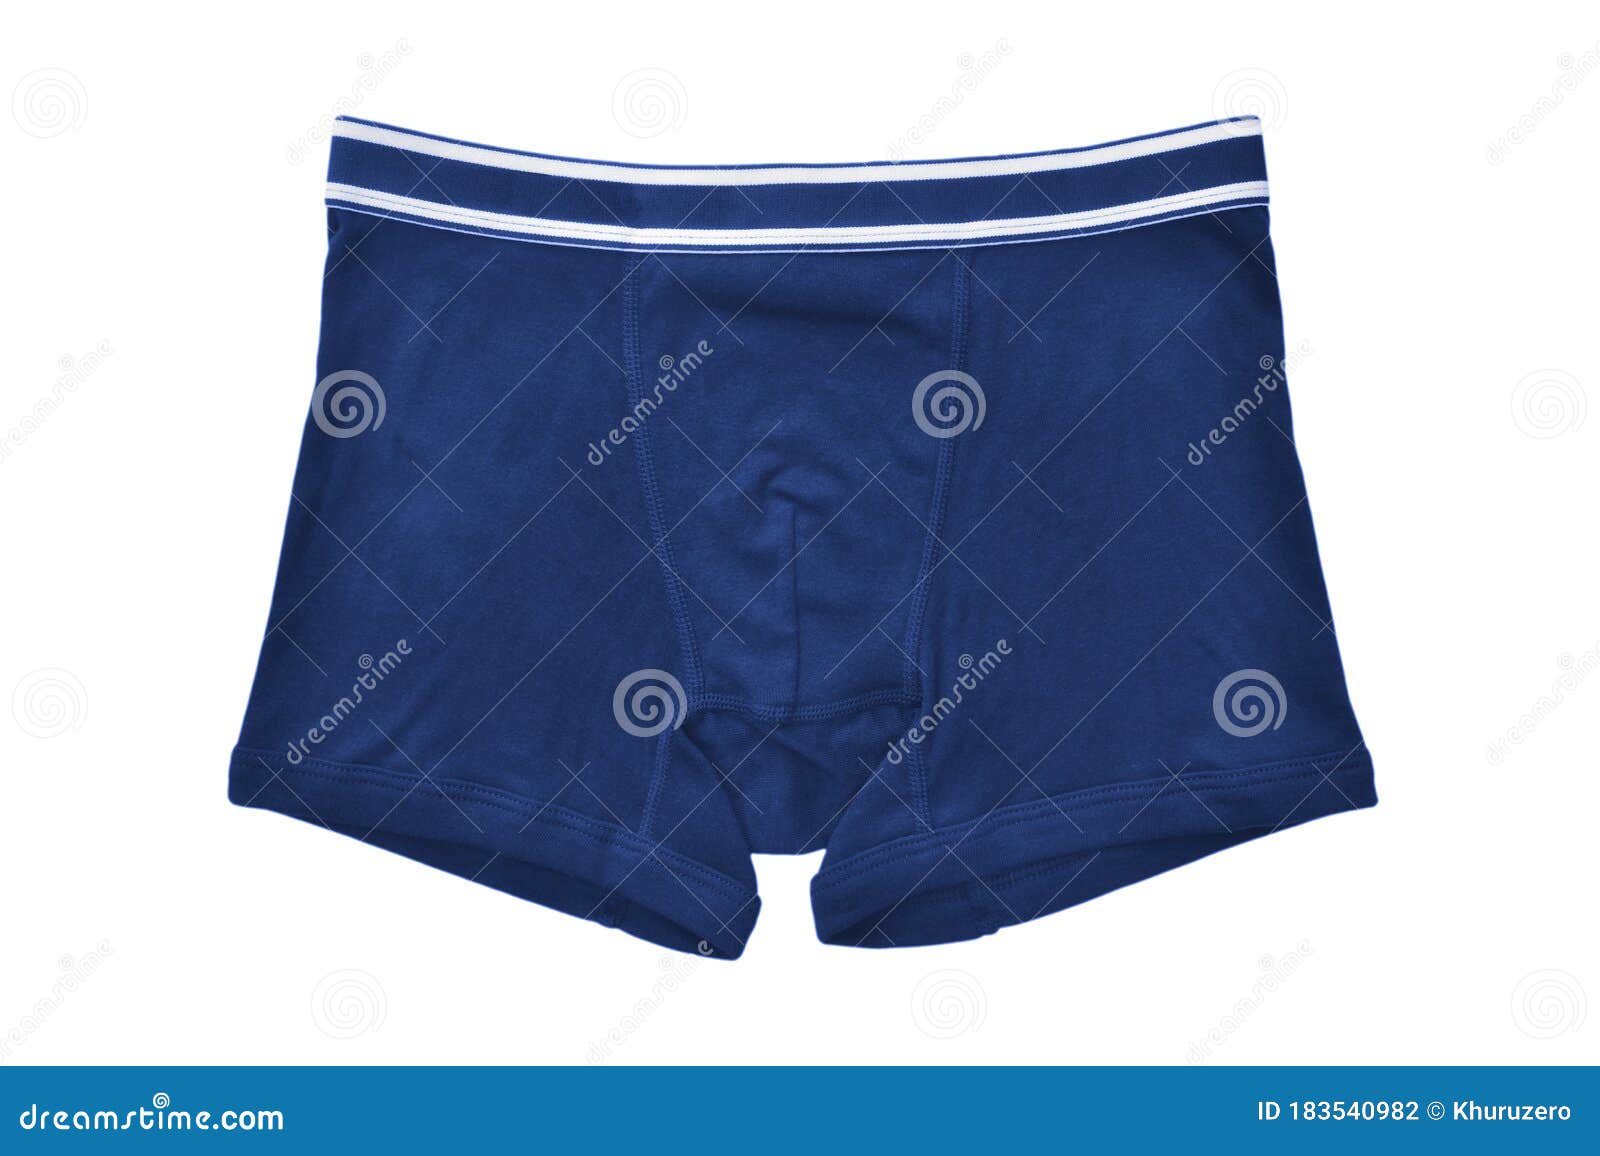 Men Underwear Isolated on White Stock Photo - Image of underpants, wear ...